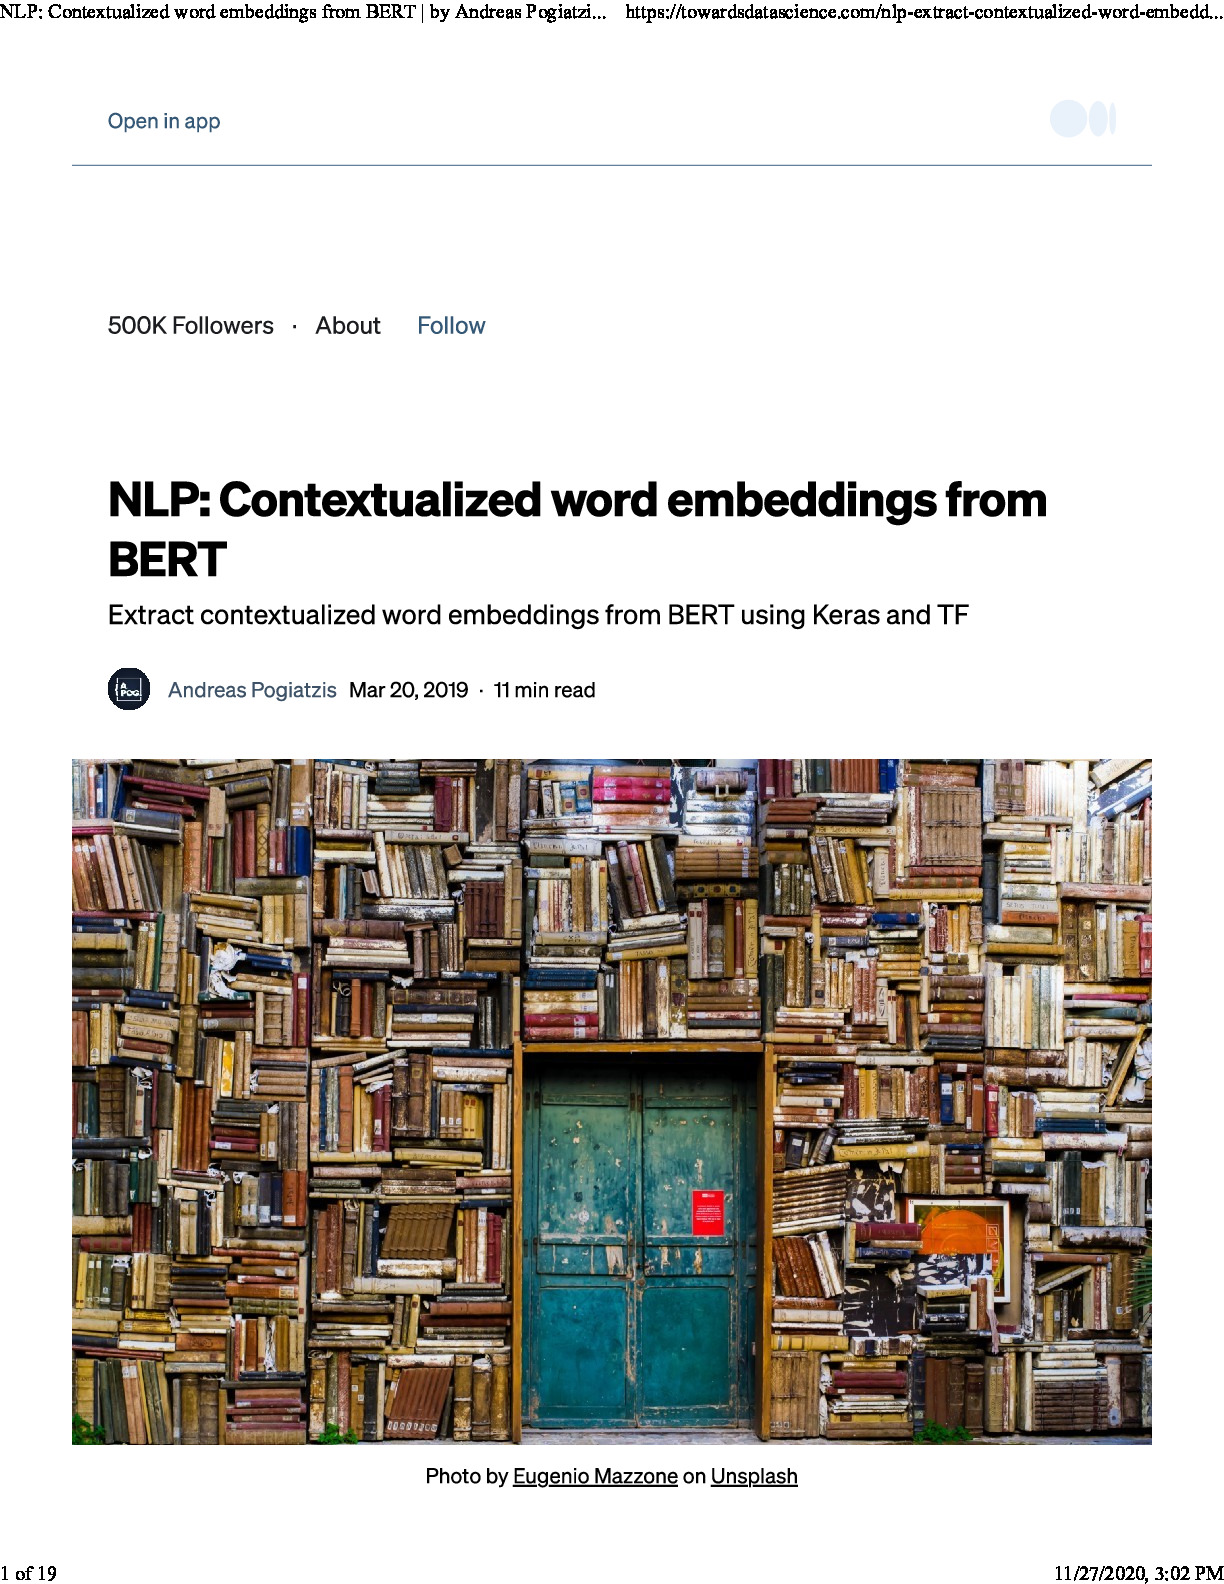 NLP Contextualized Word Embeddings from BERT